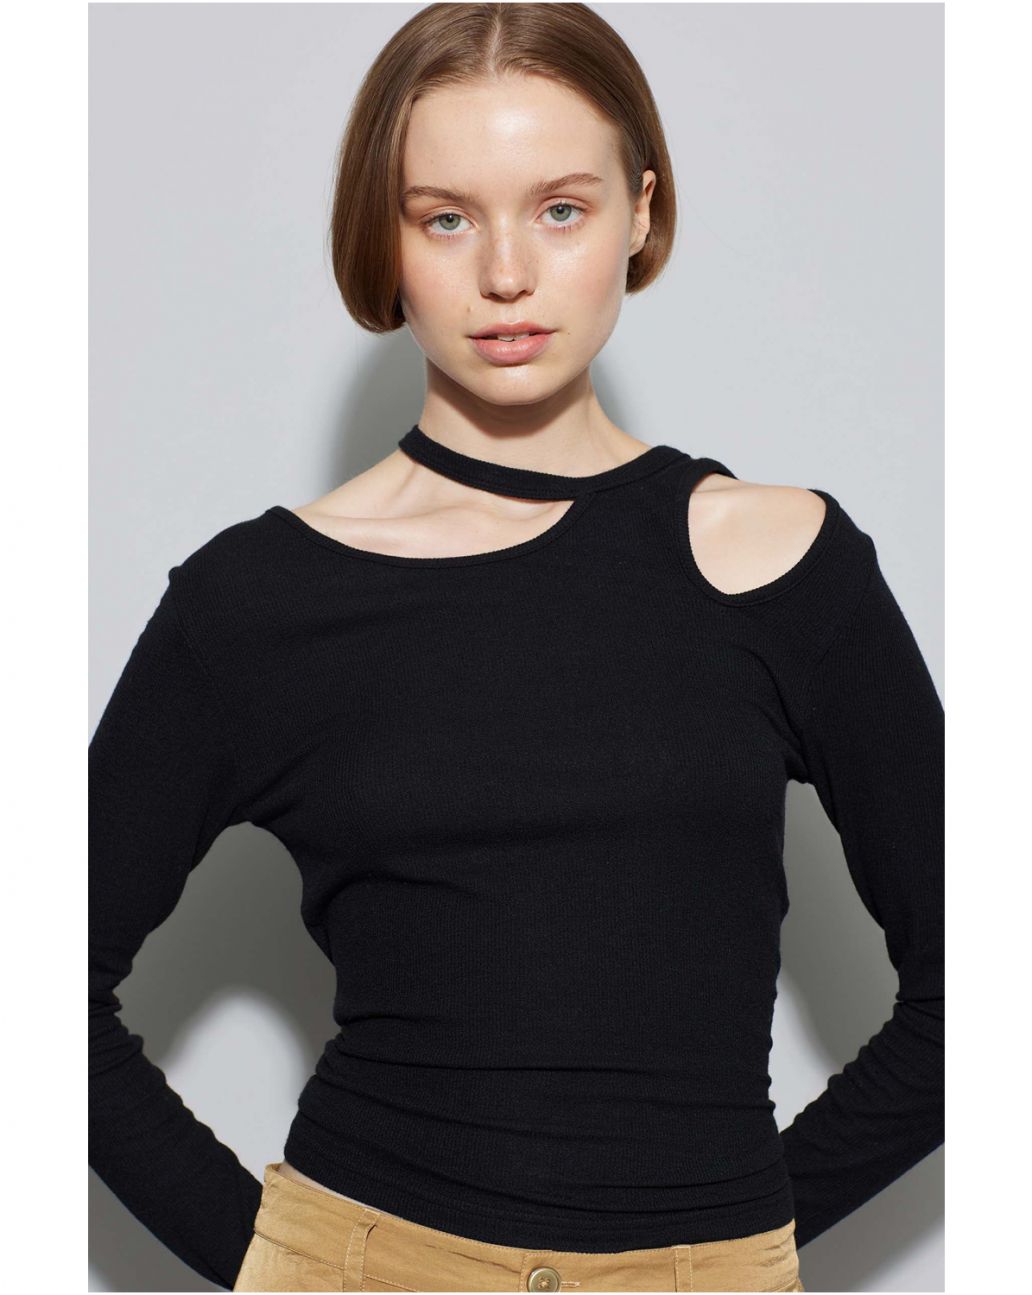 Oval Square Cut Out top